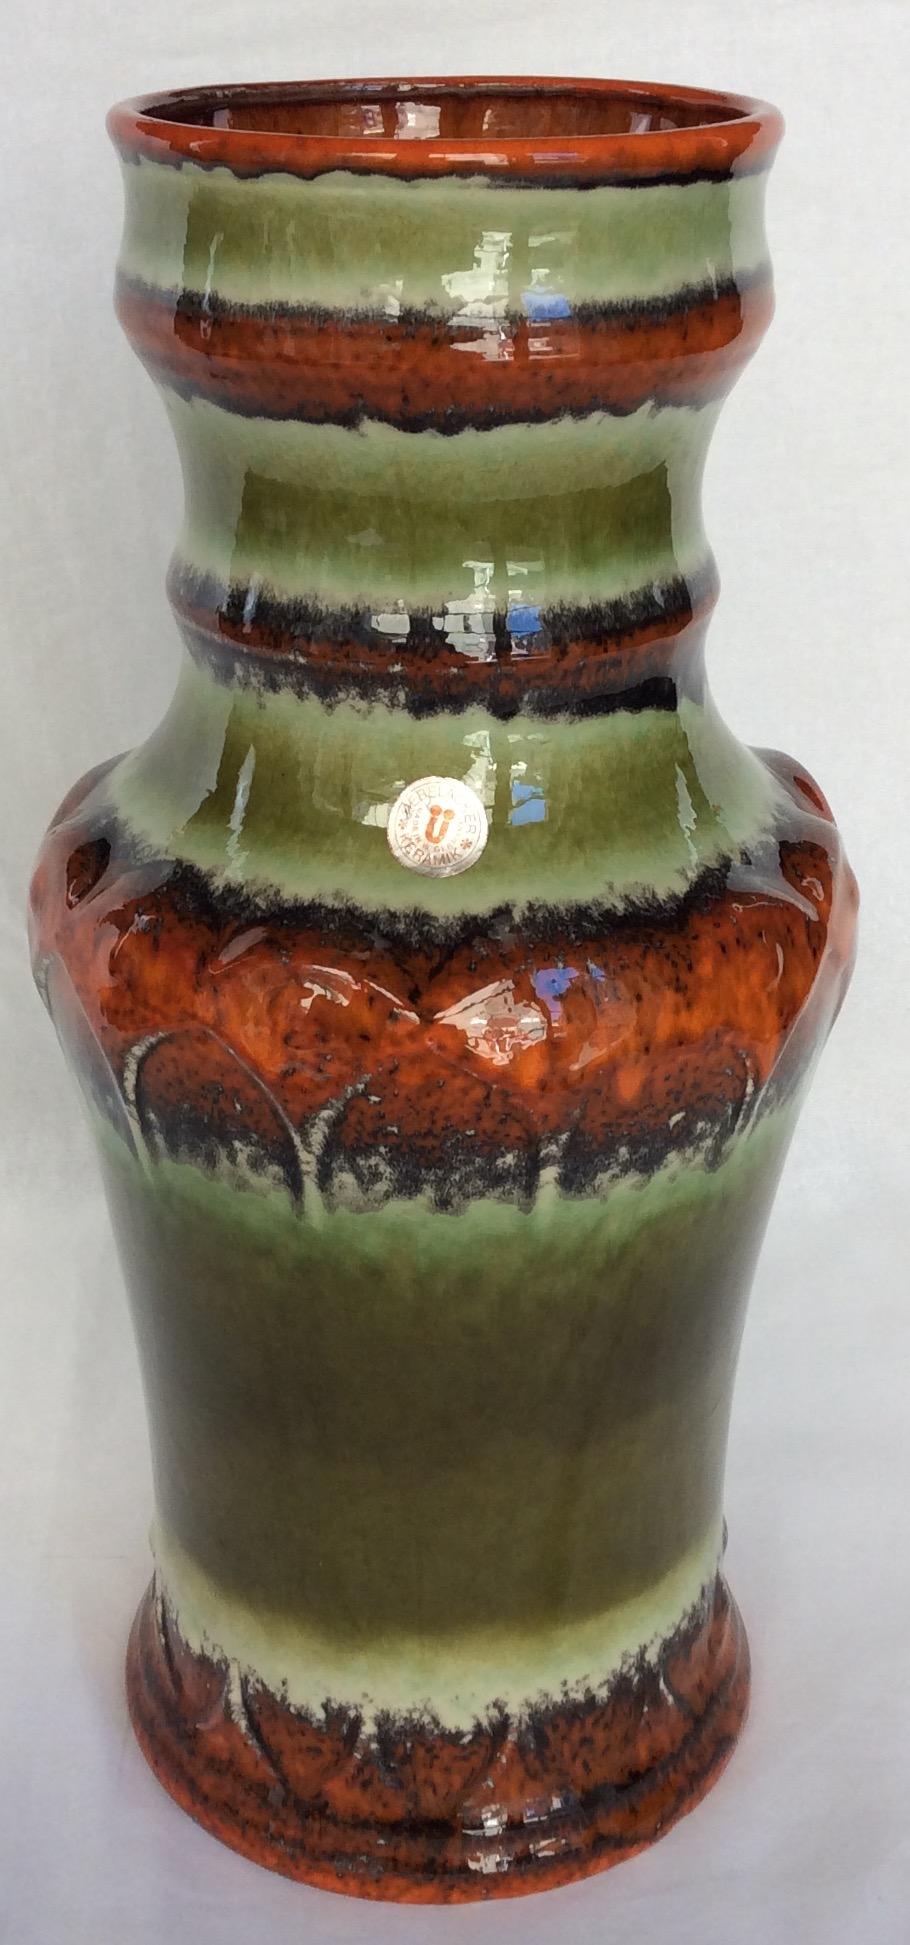 This tall collectable midcentury vintage vase was produced circa 1965 by the renowned manufacturer of West German pottery - Uebelacker Keramik. The vase features stunning green, orange, beige and brown hues with and is perfectly glazed. This